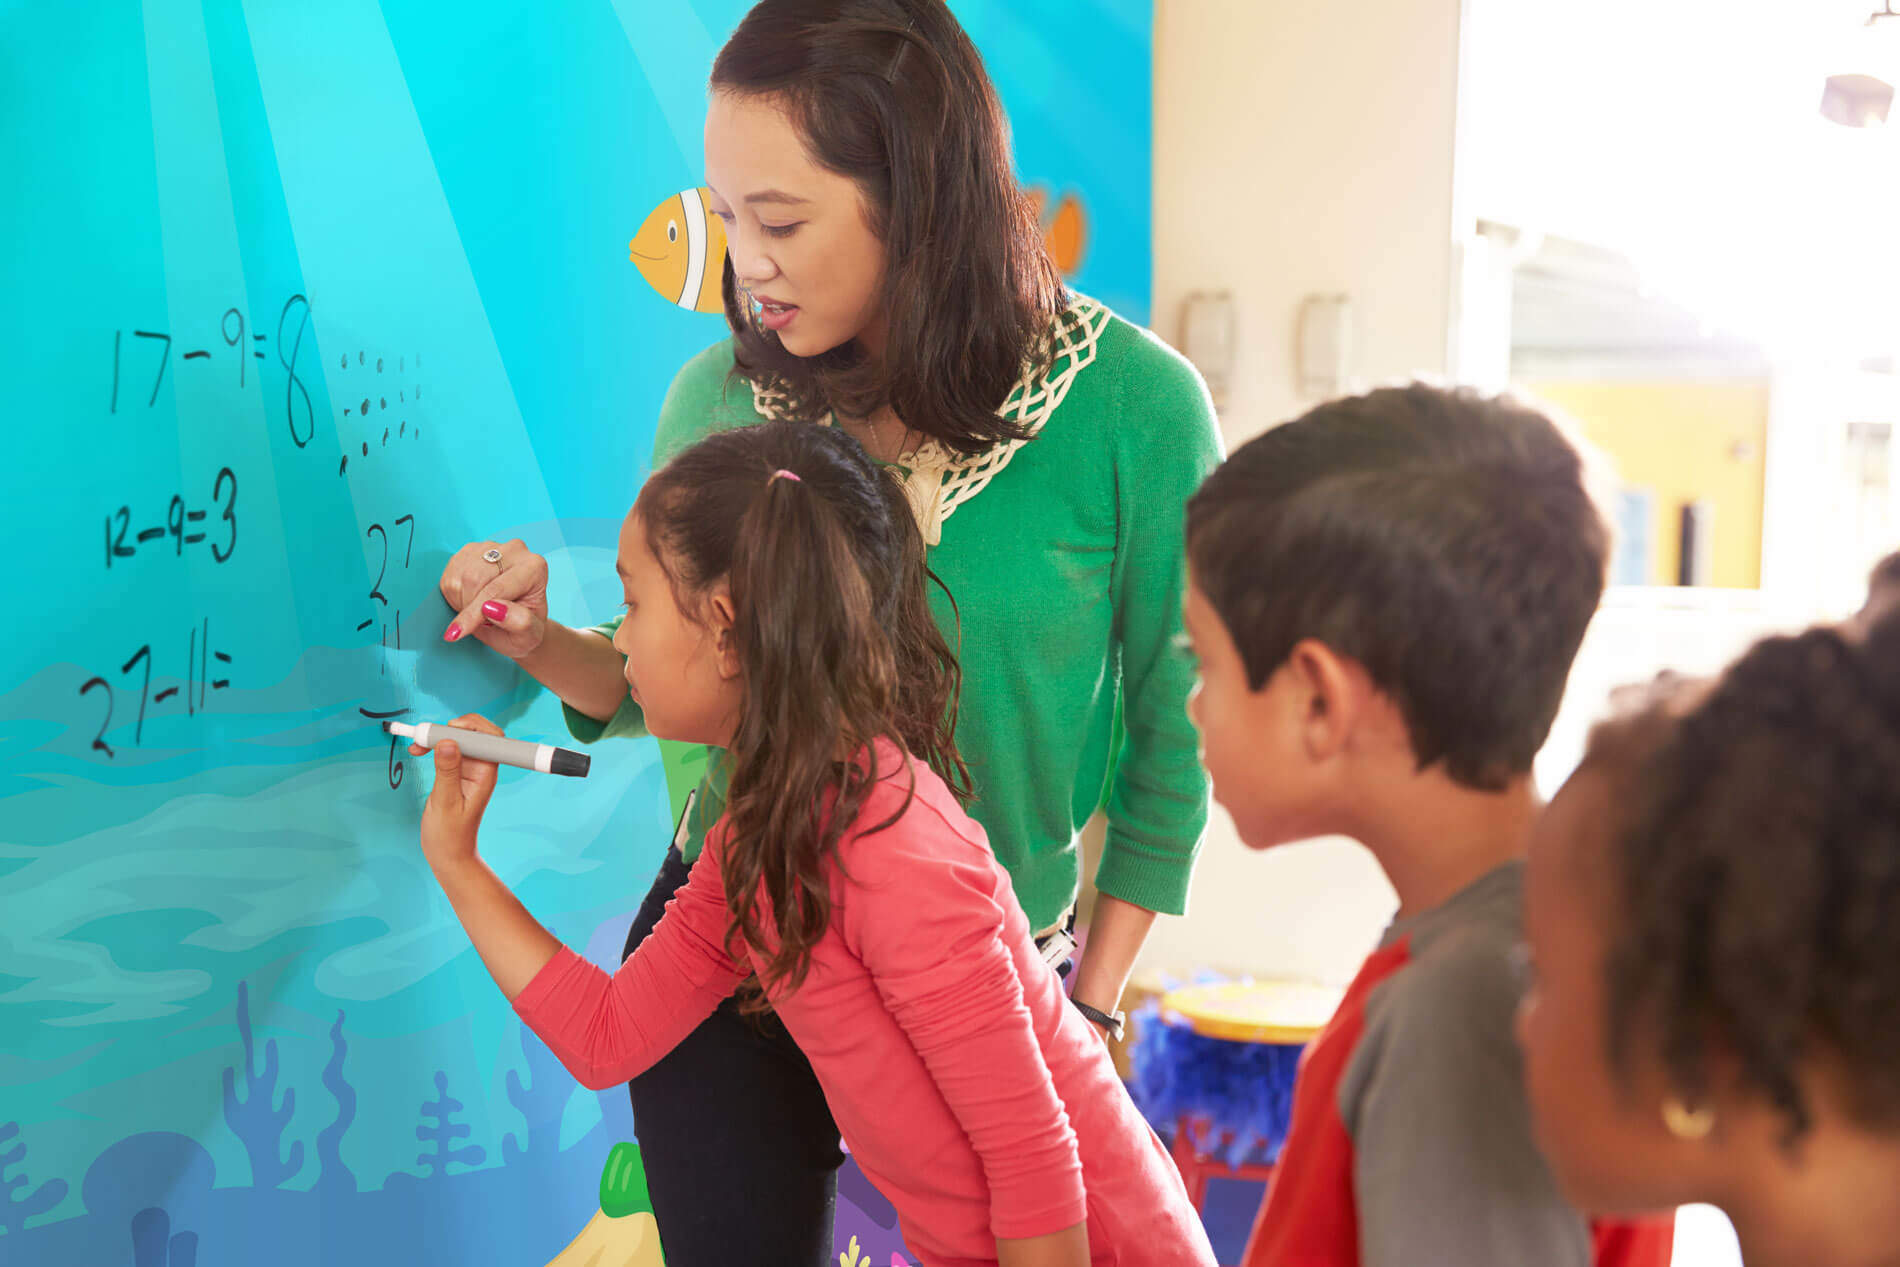 Image of Dry Erase Writable Walls For School Classrooms, Colleges & Sports Rooms